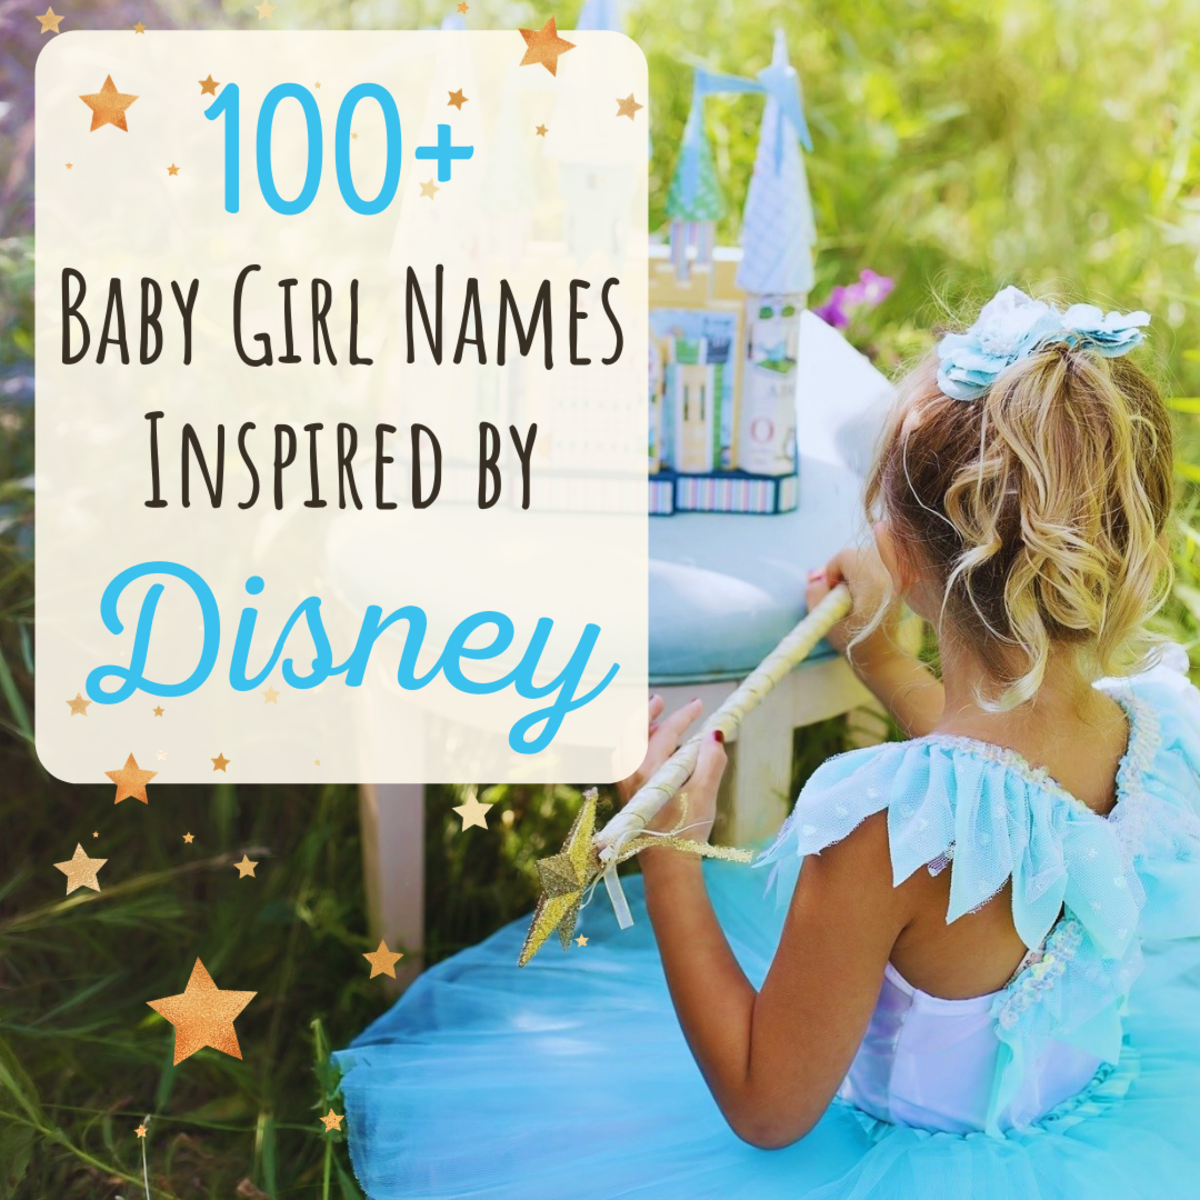 The world of Disney offers hundreds of strong, beautiful names for women. Find inspiration for your baby girl's name in this list!